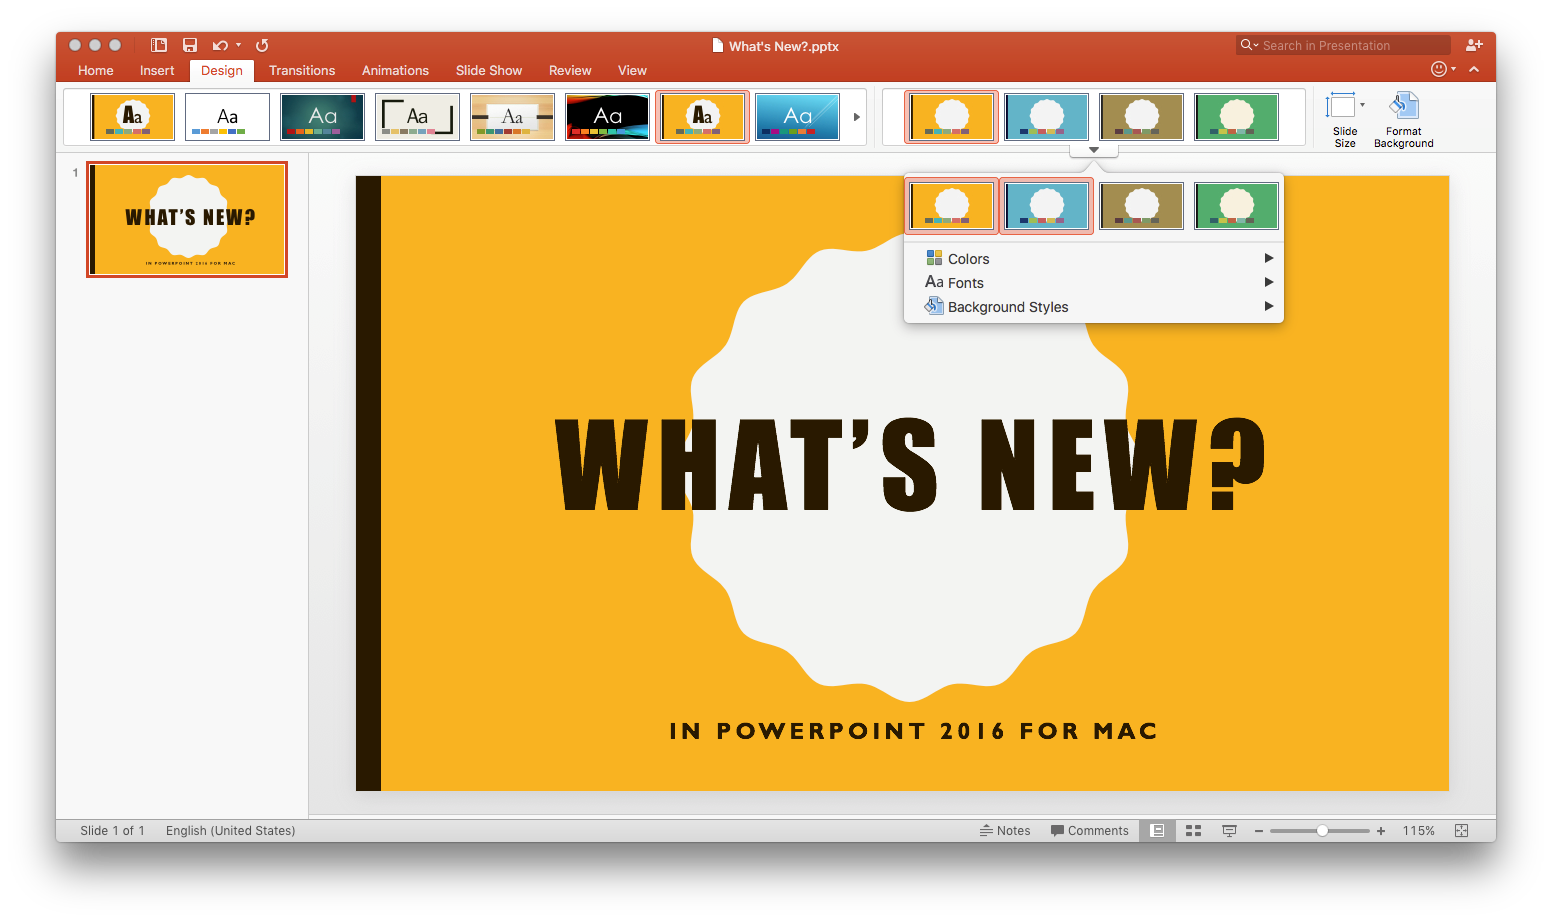 powerpoint for mac does not minimize window